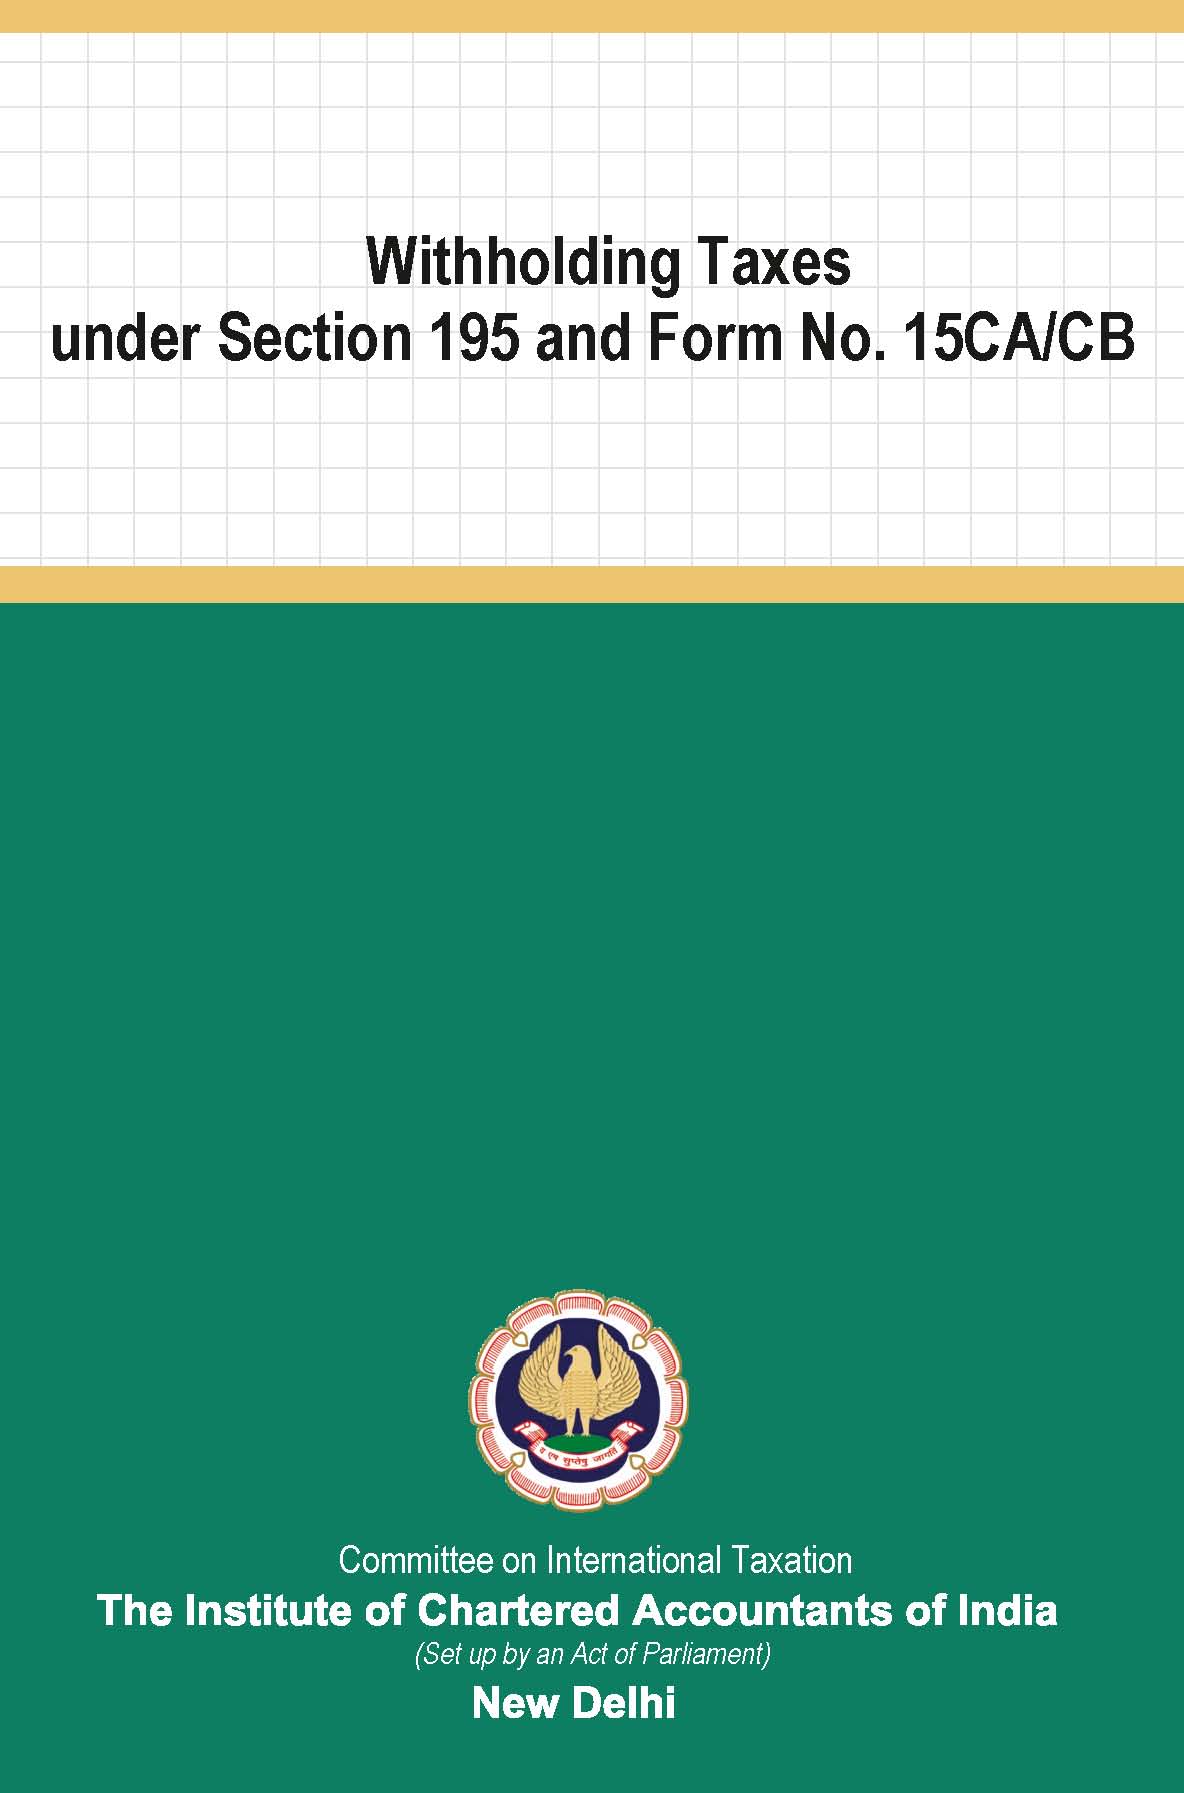 Withholding Taxes under Section 195 and Form No. 15CA/CB - January, 2023